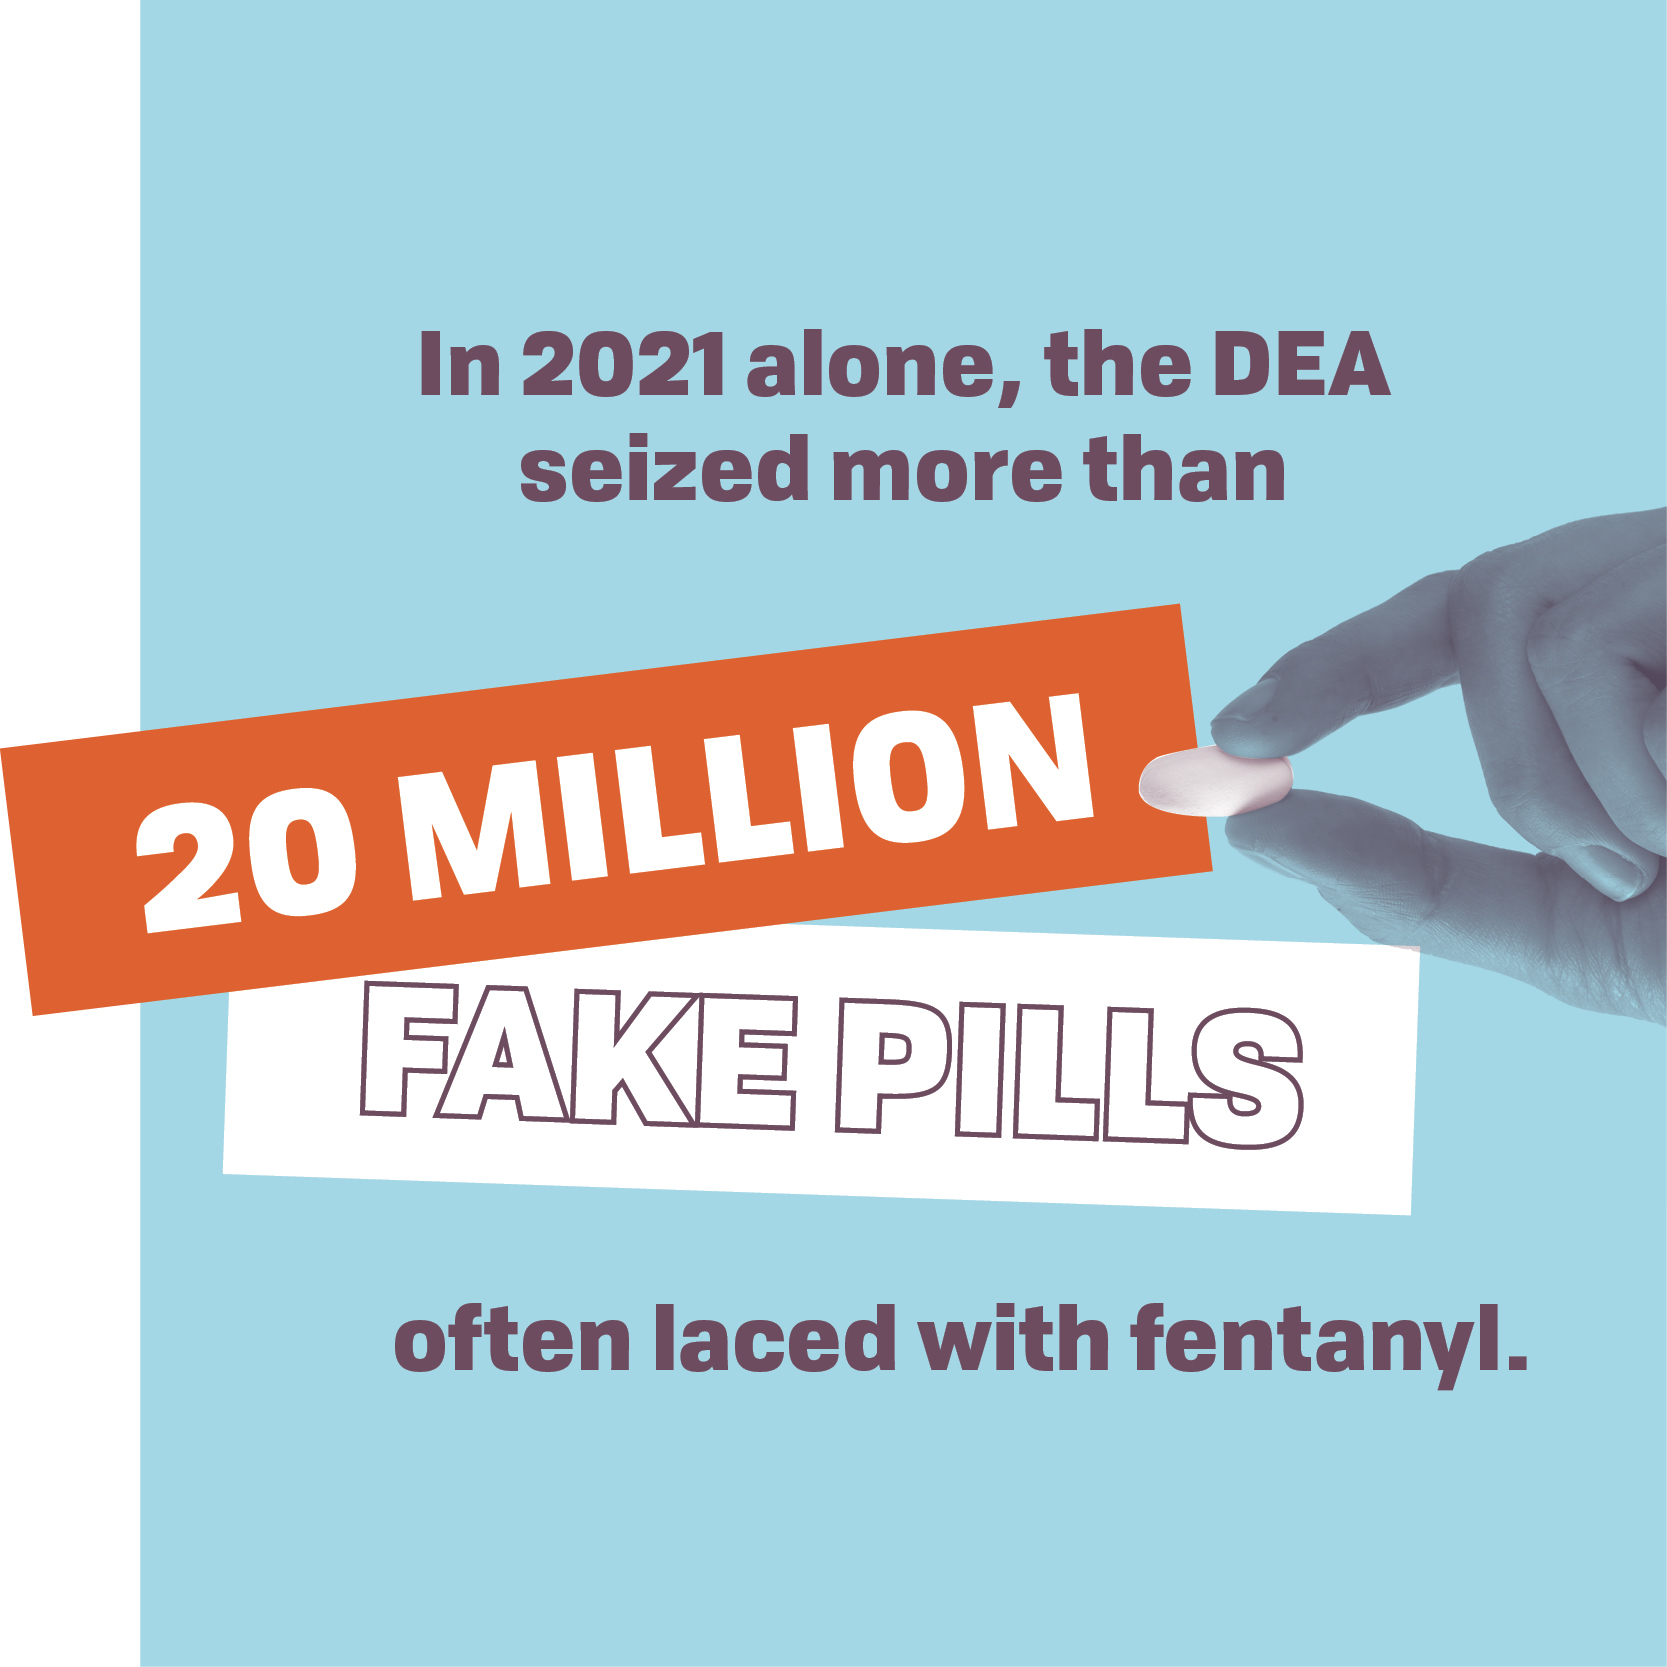 In 2021 alone, the DEA seized more than 20 million fake pills.